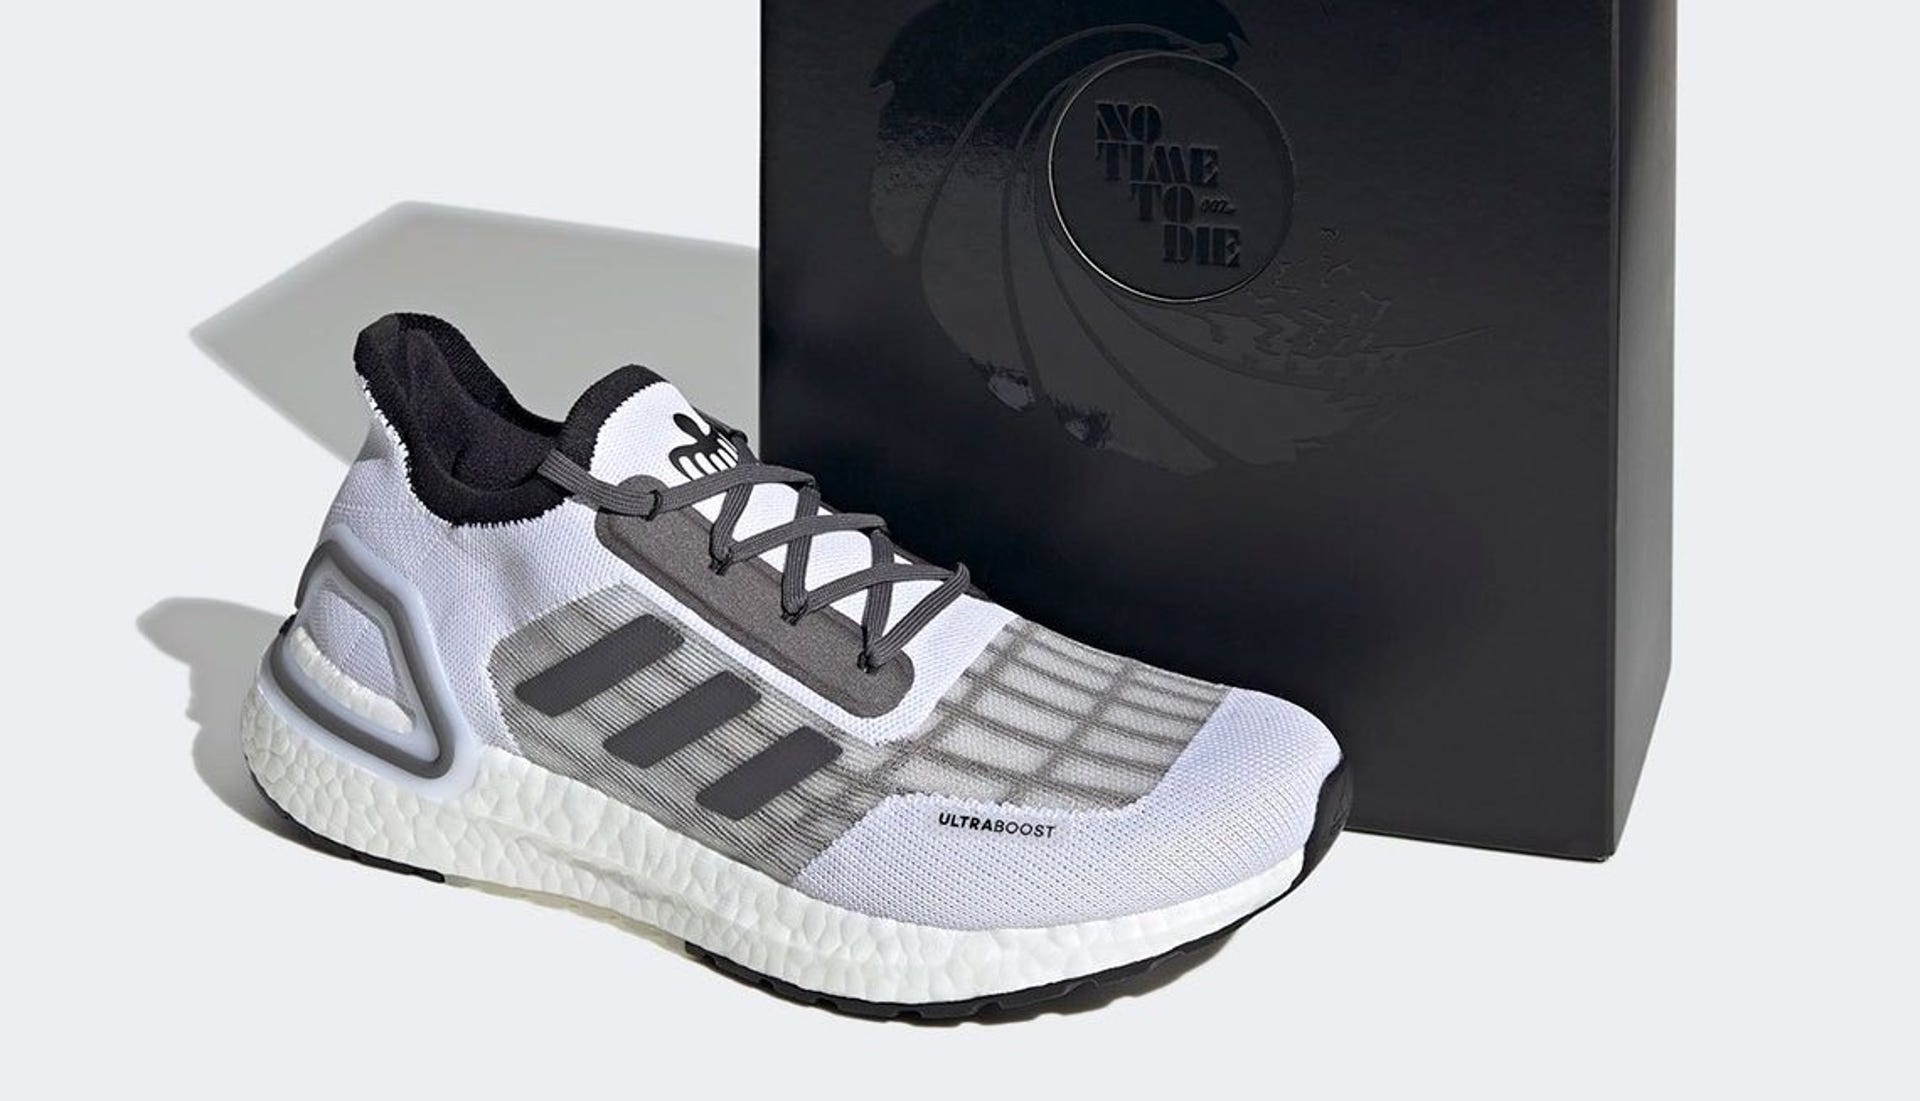 James 007 Adidas sneakers sneak into action with Time to Die - CNET